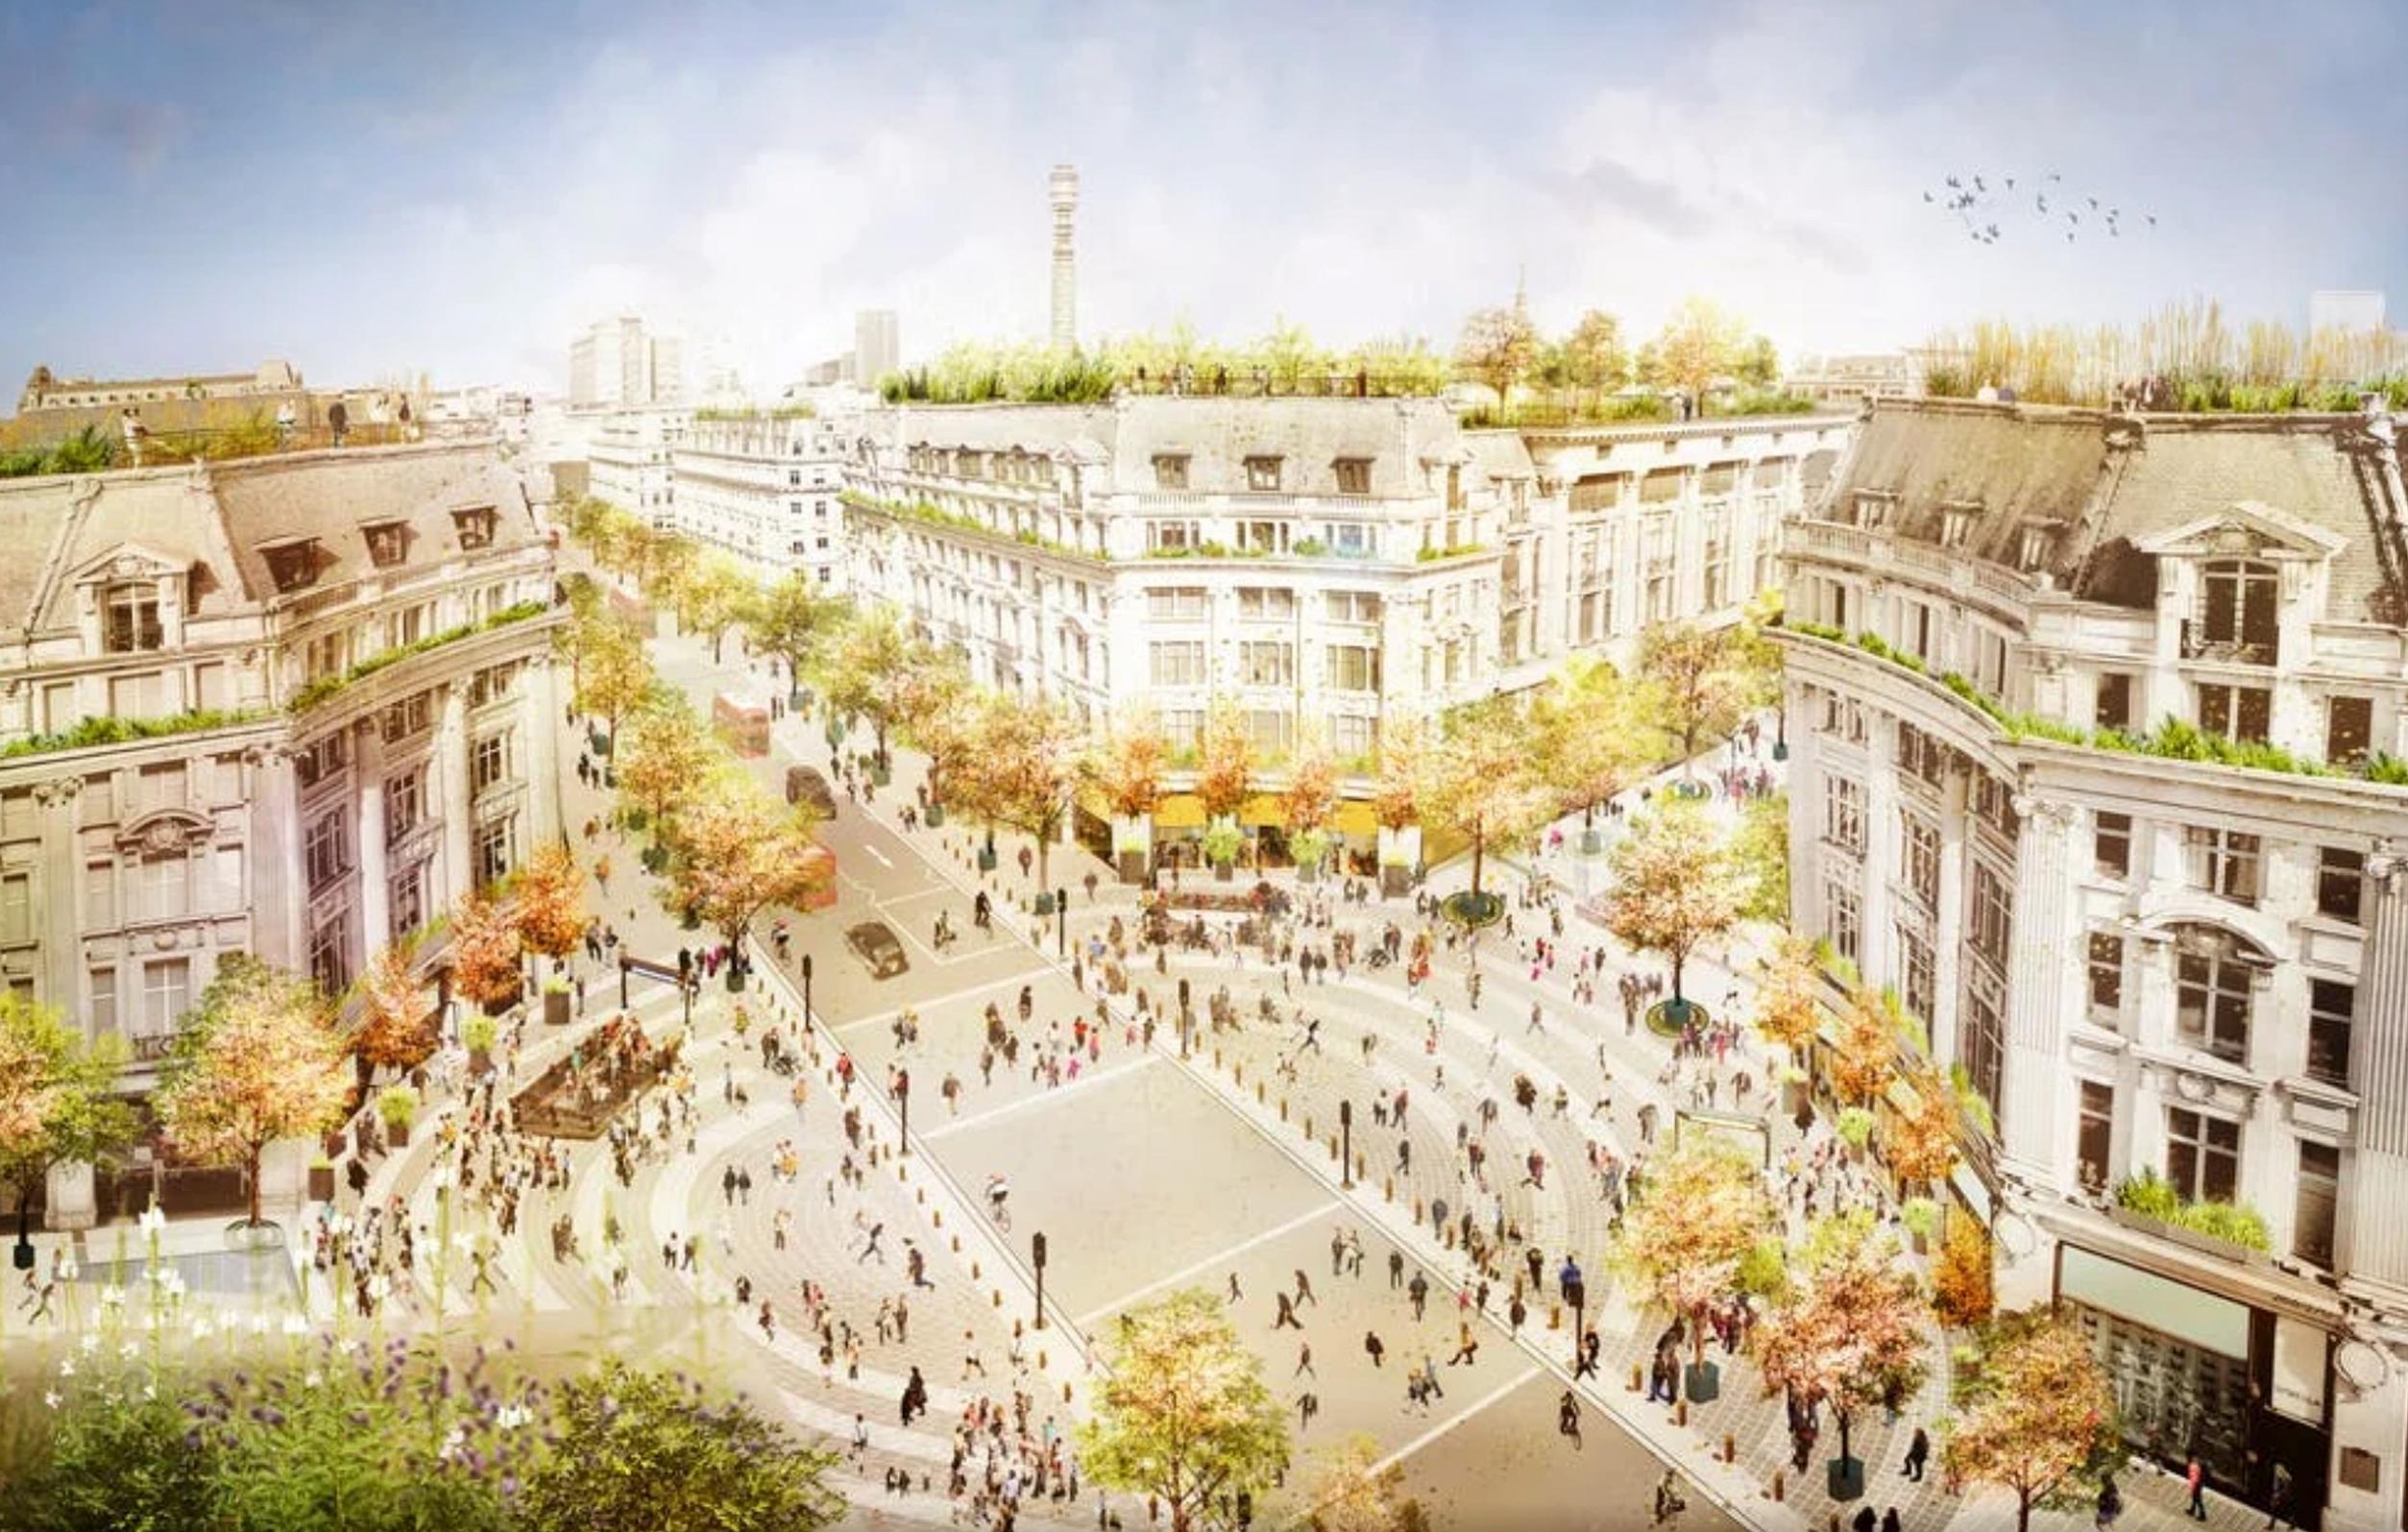 ‘Pedestrian-first zones’ will be created to the east and west of Oxford Circus, with additional planting and seating